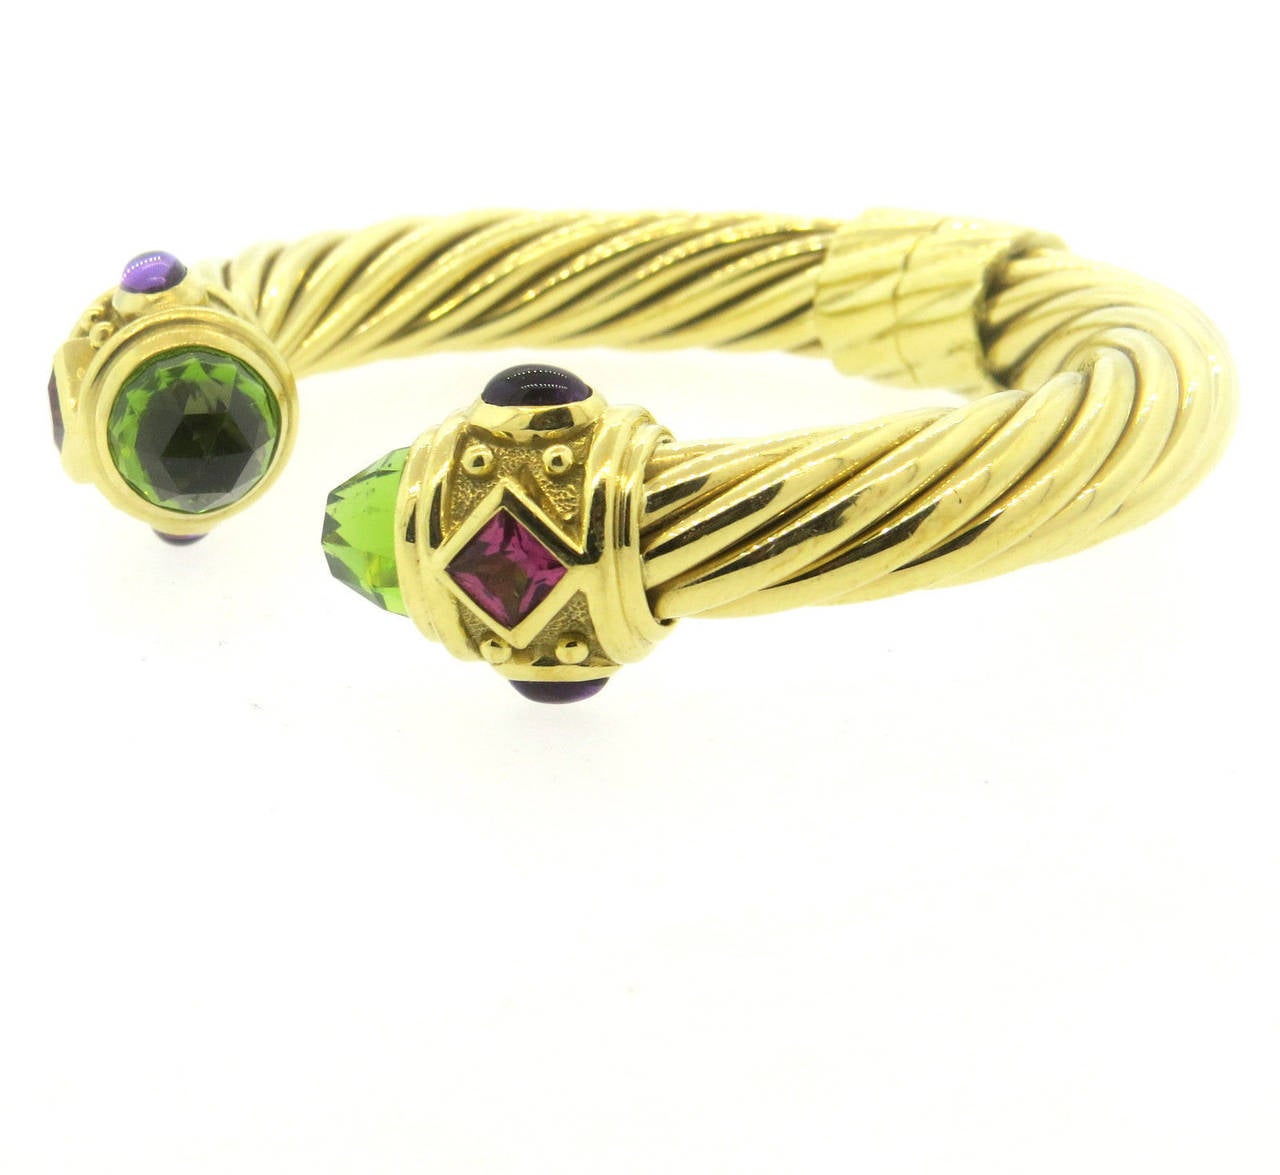 18k gold 10mm cable cuff bracelet, designed by David Yurman for Renaissance collection, featuring peridot, amethyst and tourmaline gemstones. Bracelet will comfortably fit up to 7